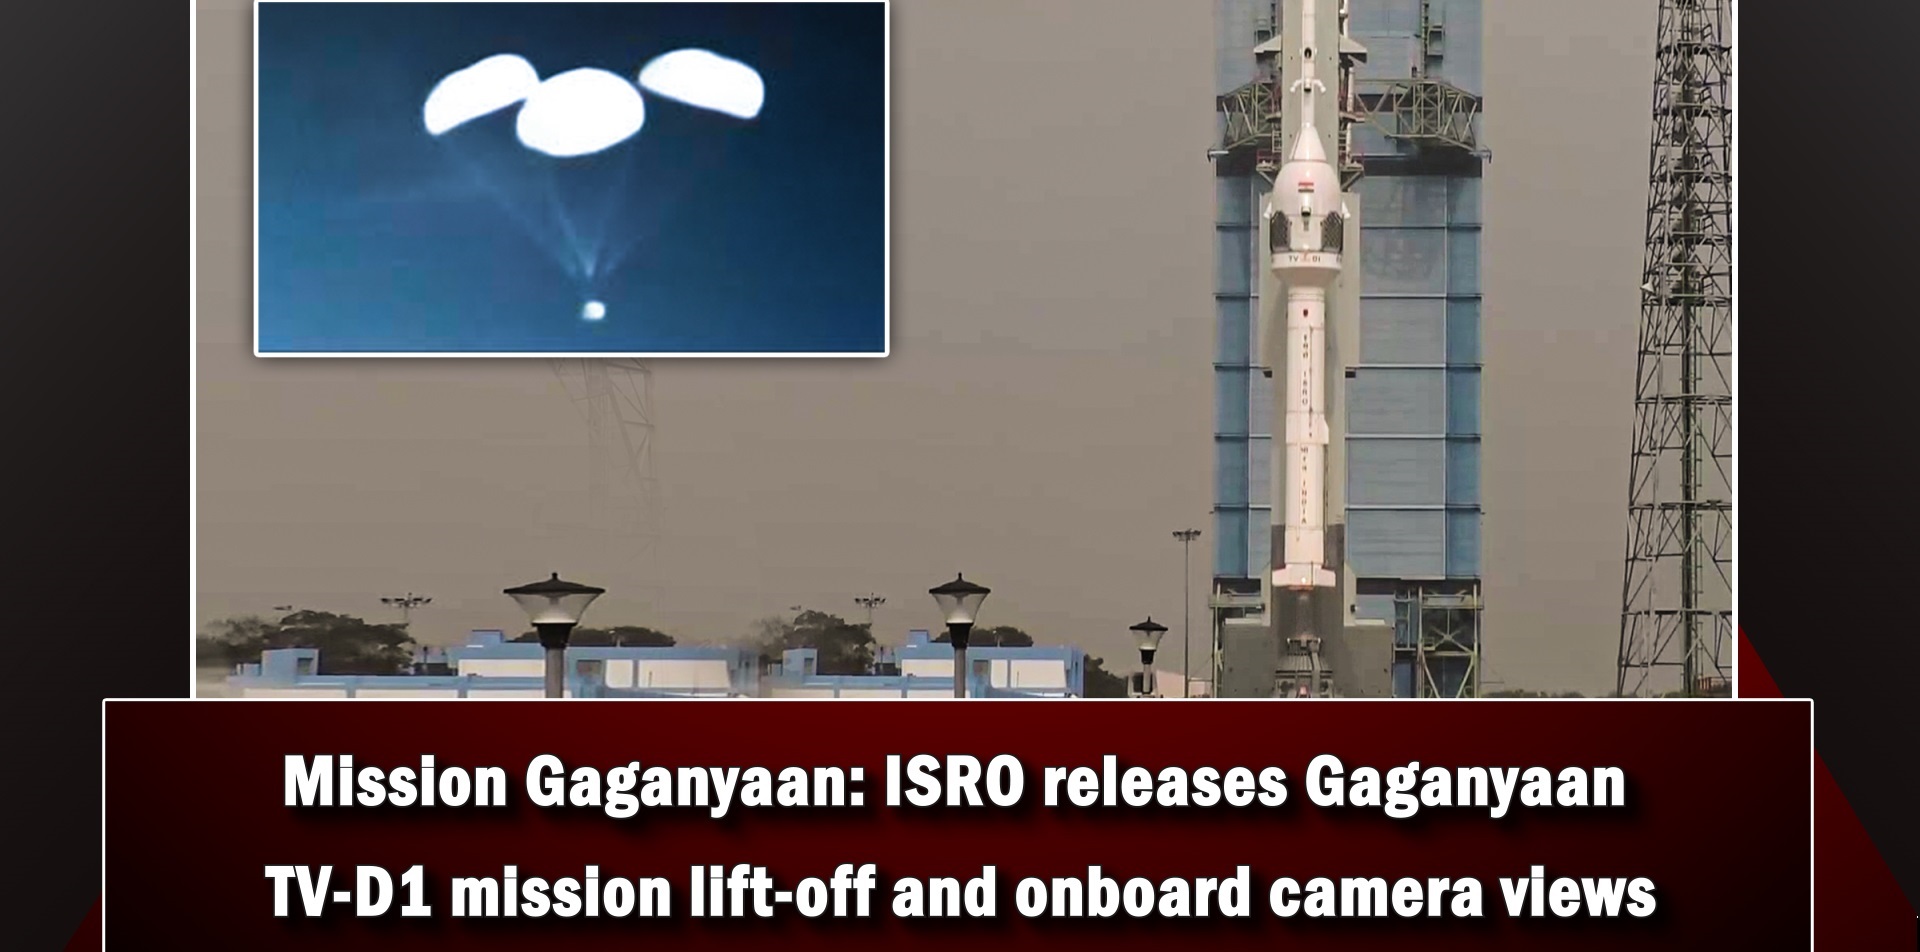 Mission Gaganyaan: ISRO releases Gaganyaan TV-D1 mission lift-off and onboard camera views